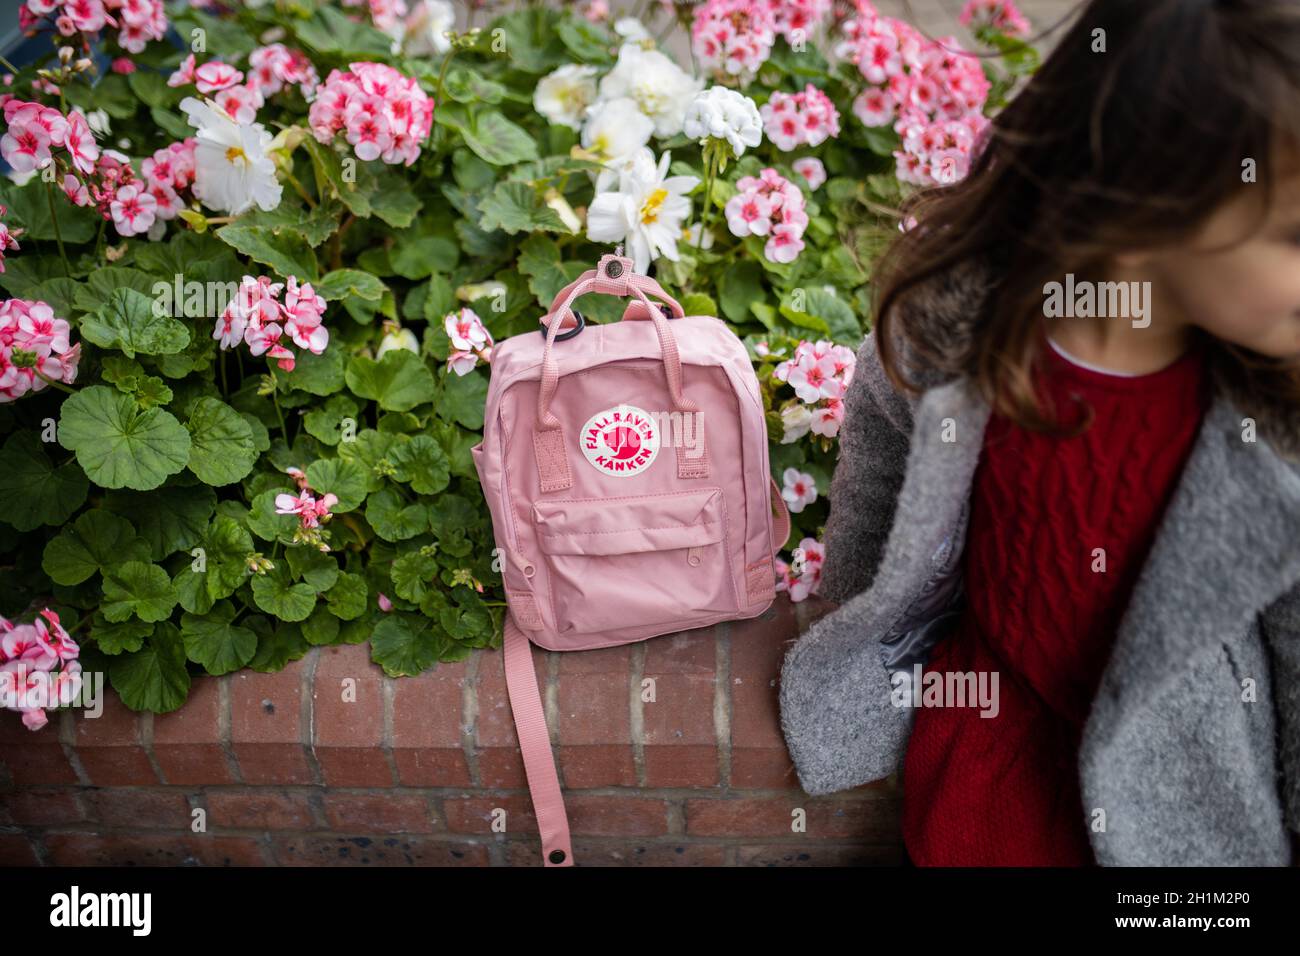 London, UK - November 4, 2020: Pink Fjallraven backpack on brick planter with pink flowers and next to little girl. Rucksack and colorful flowers on b Stock Photo